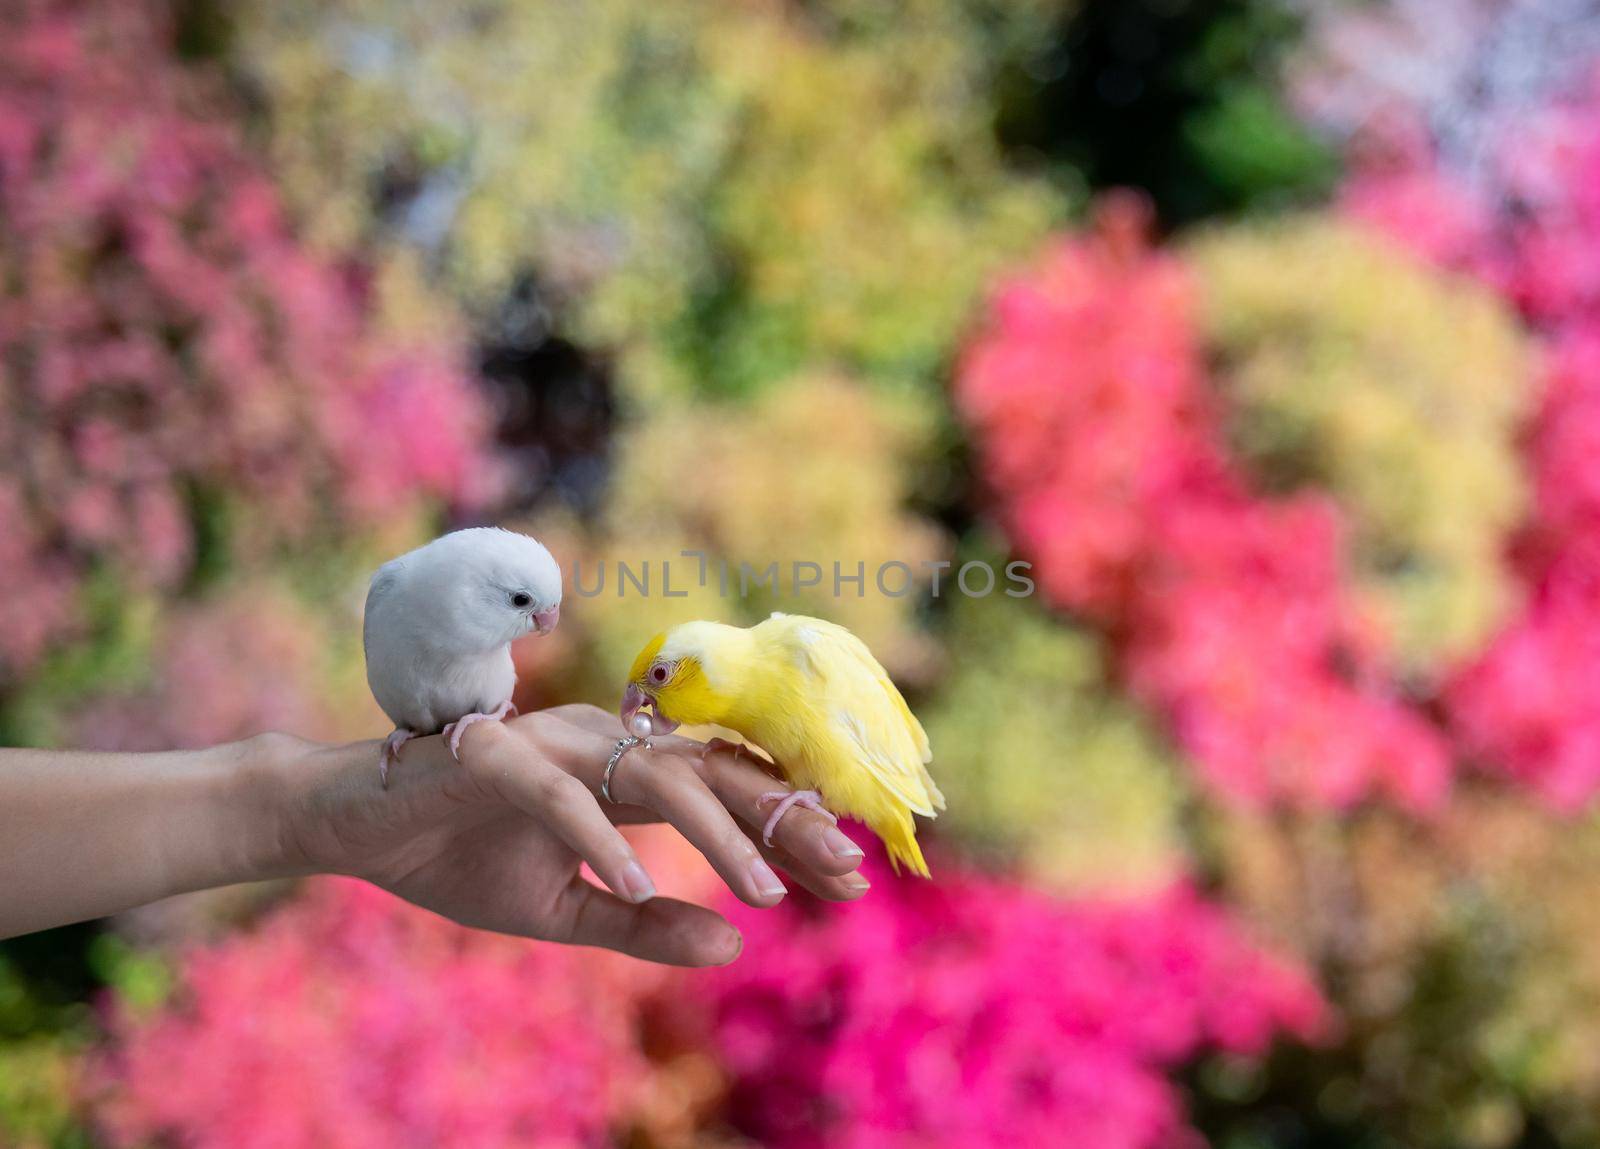 Tiny parrot yellow and white Forpus bird on hand, yellow parrot try to bite pearl ring.